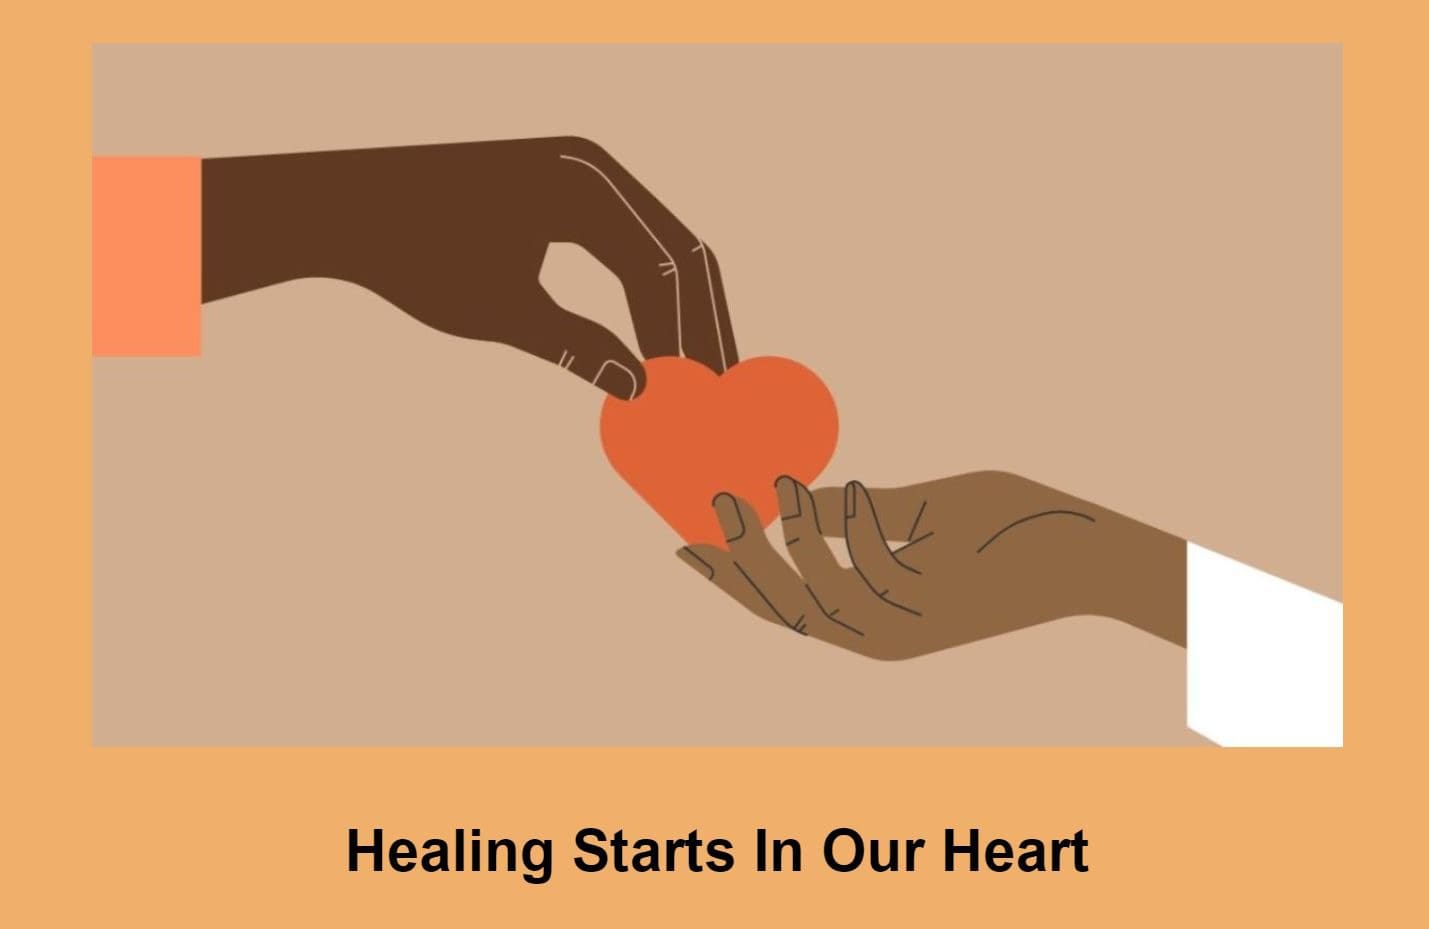 A person is holding an orange heart in their hand.